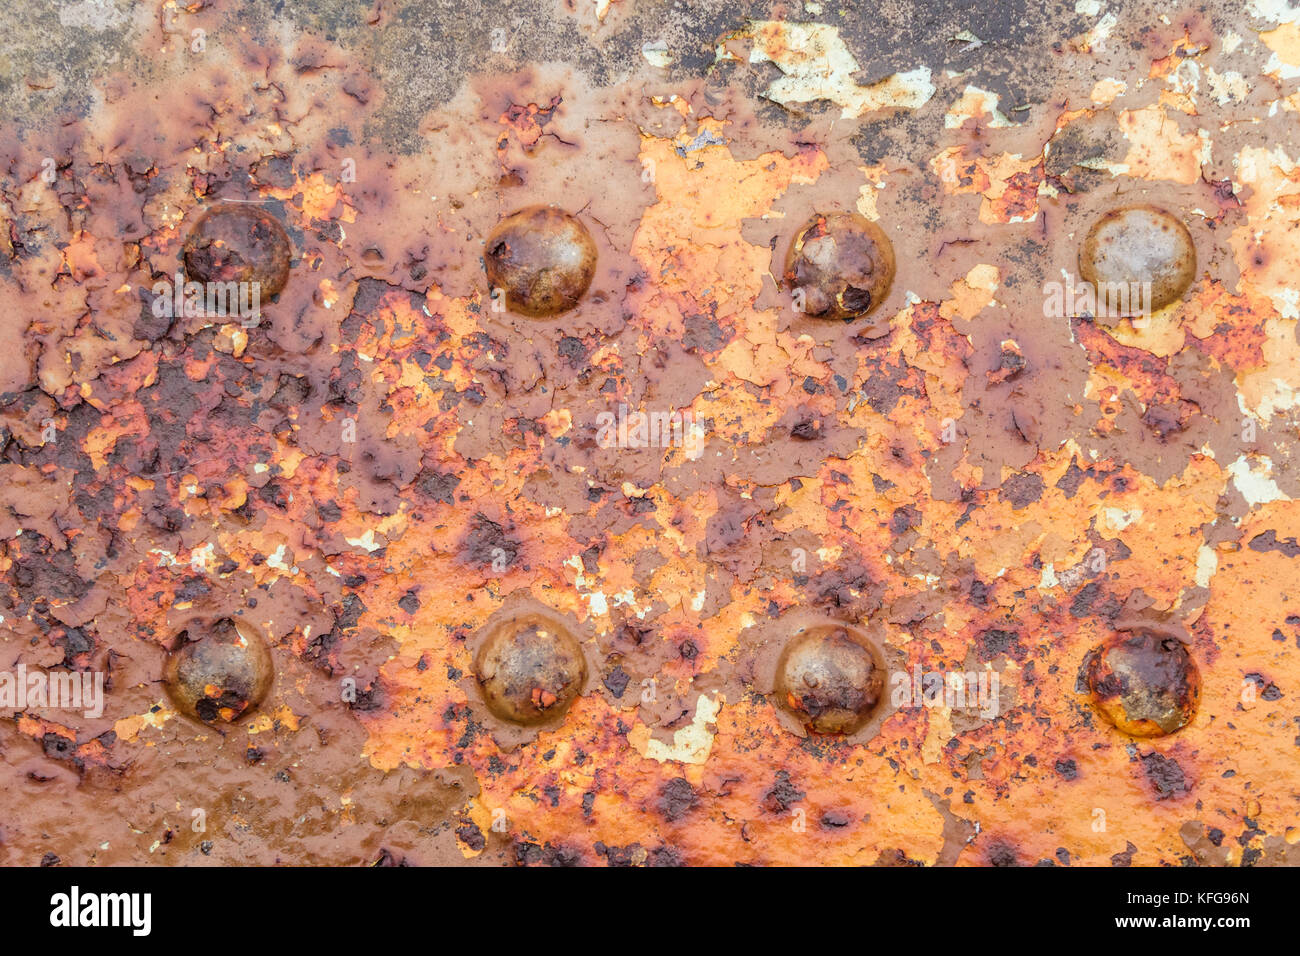 A rusty steel girder with rivets on sea defences, England, UK Stock Photo